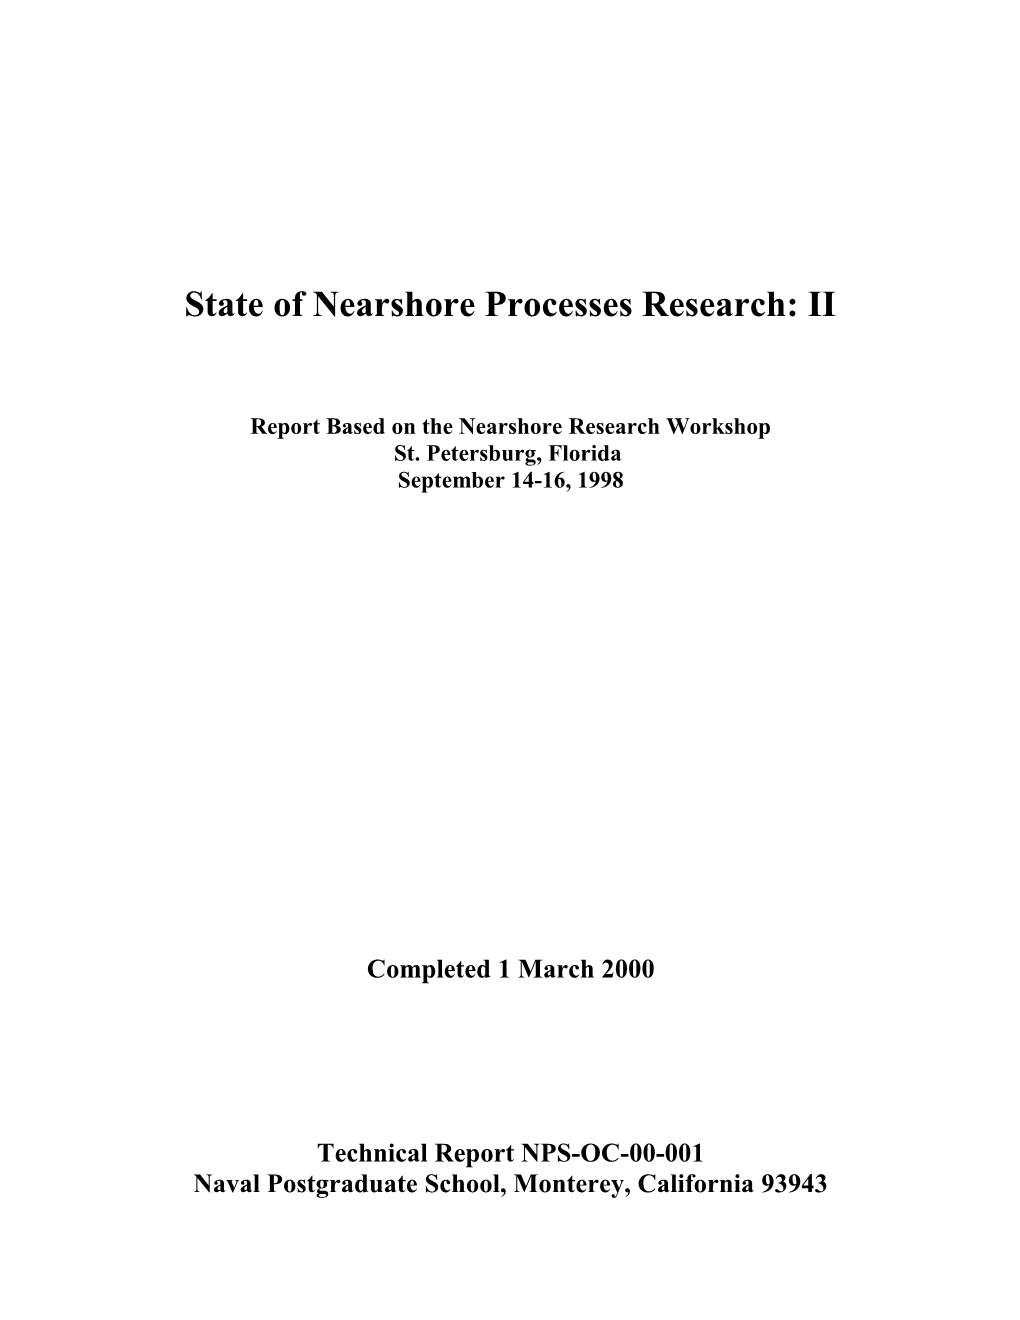 Nearshore Research Workshop Report